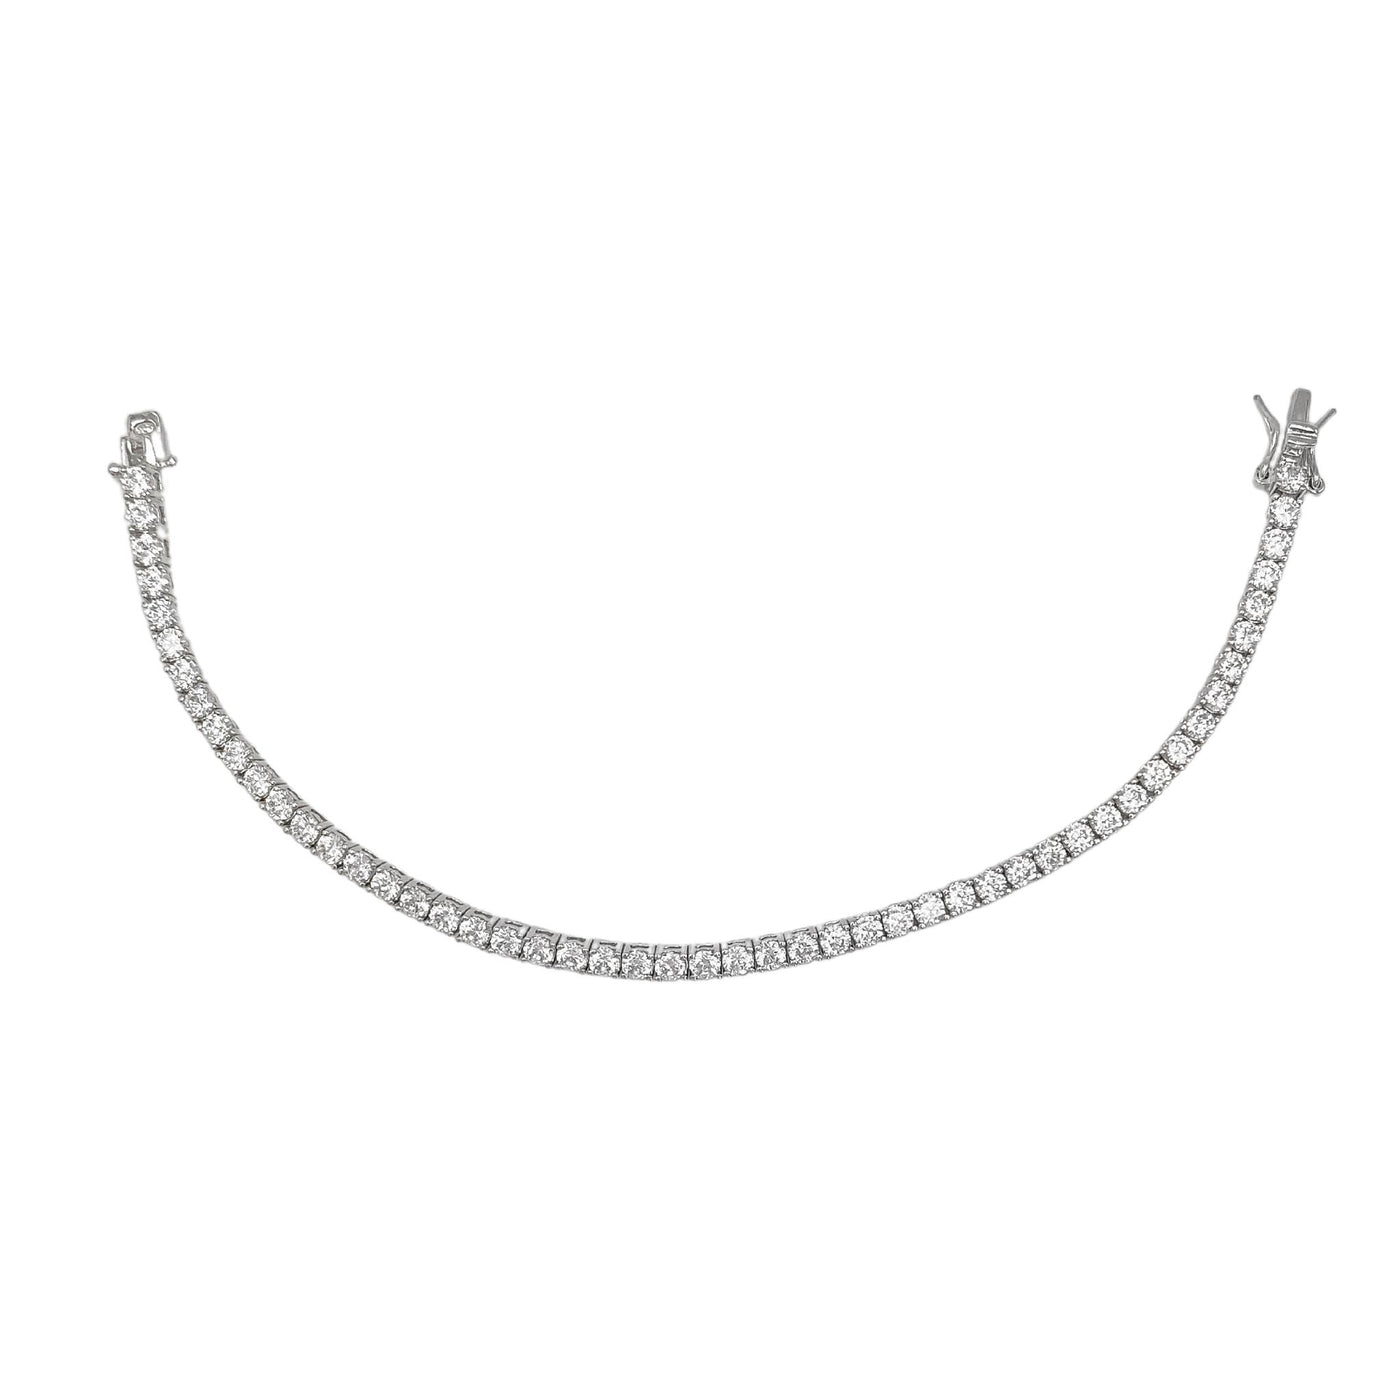 Silver casting tennis bracelet with white round stones - 3 mm